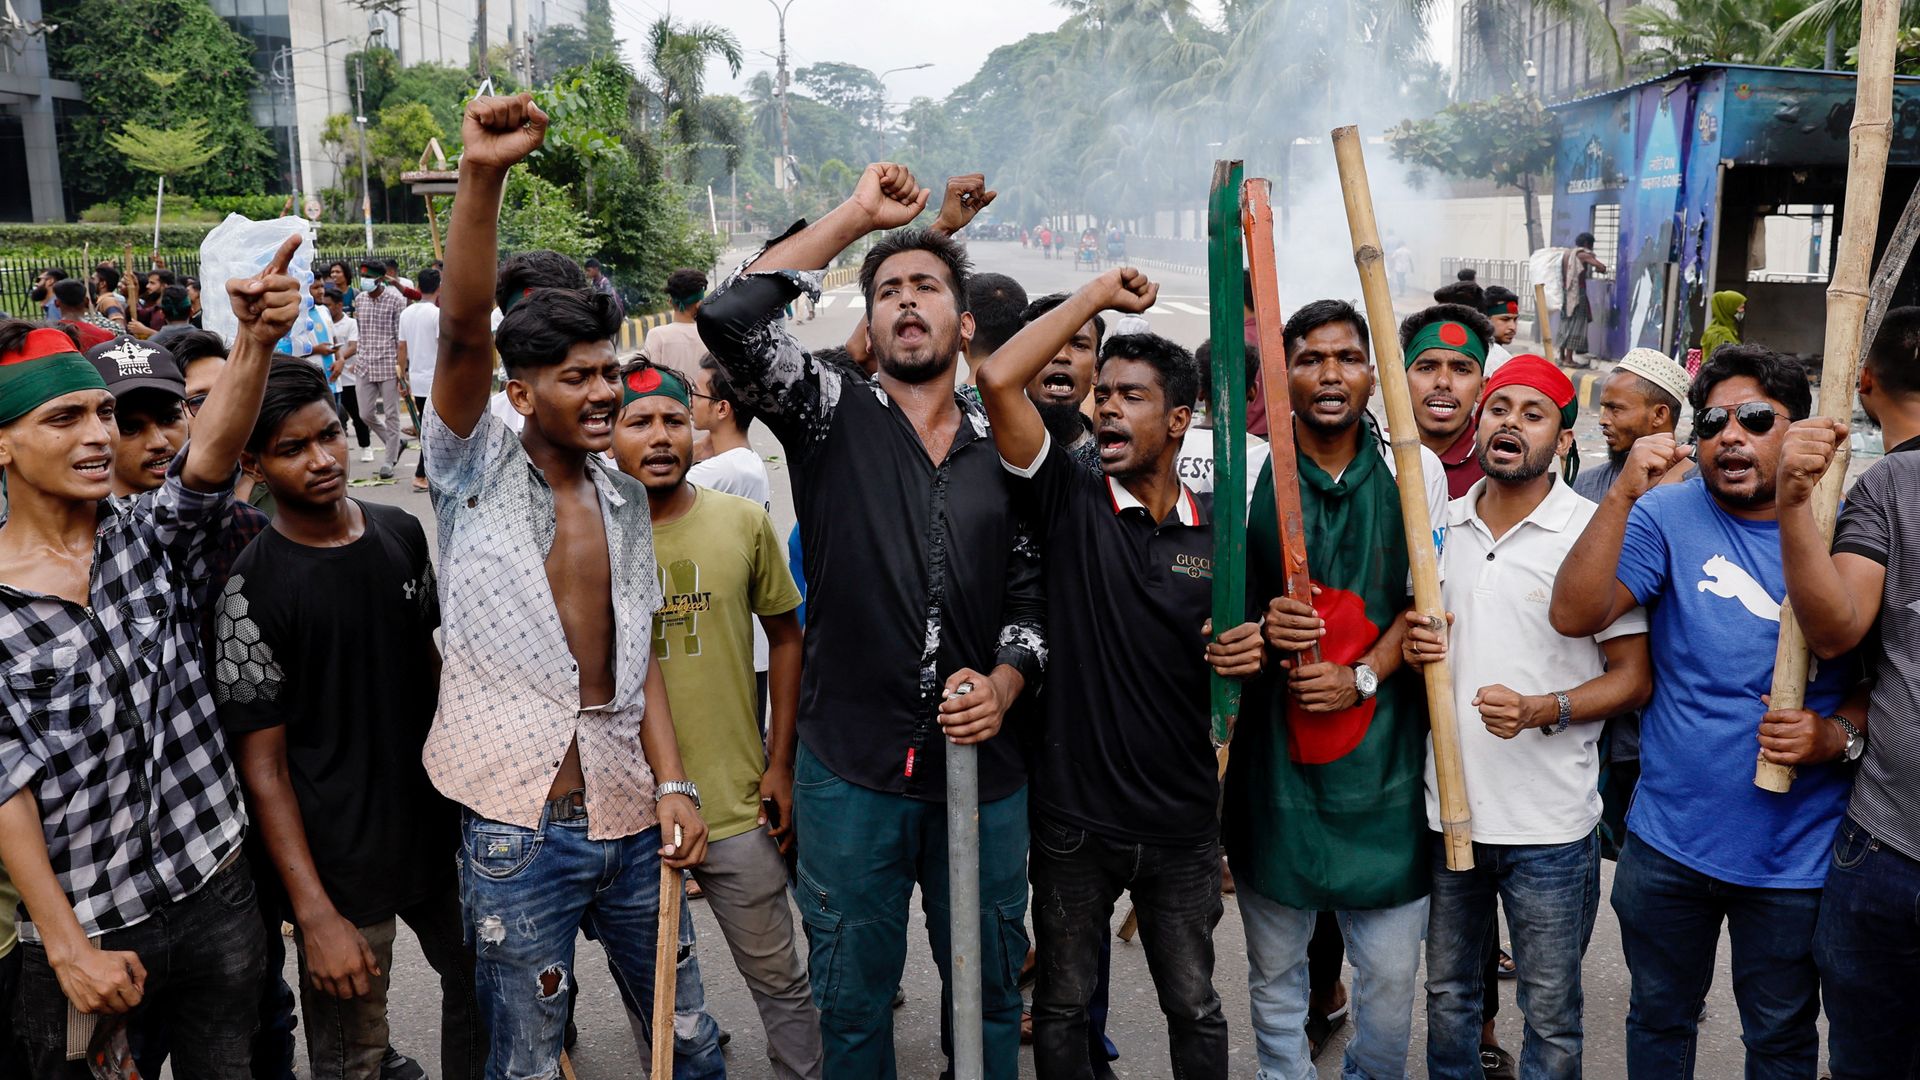 Almost 100 people killed in Bangladesh protests as nationwide curfew imposed